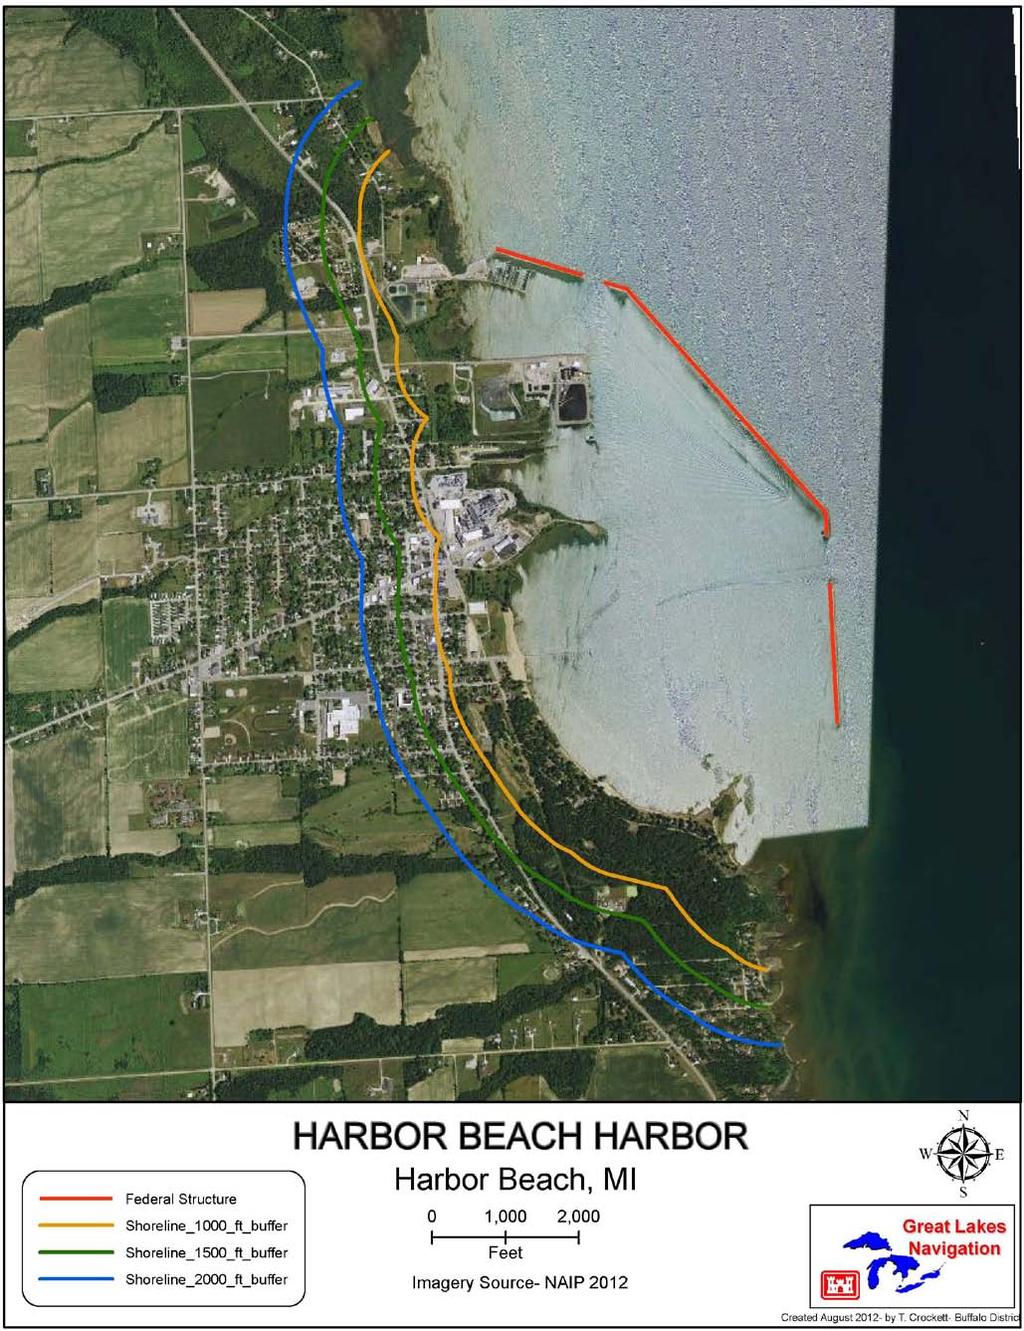 Potential Impact Area: The following graphic displays property parcels that could be impacted within various zones defined by different setbacks from the shoreline behind existing